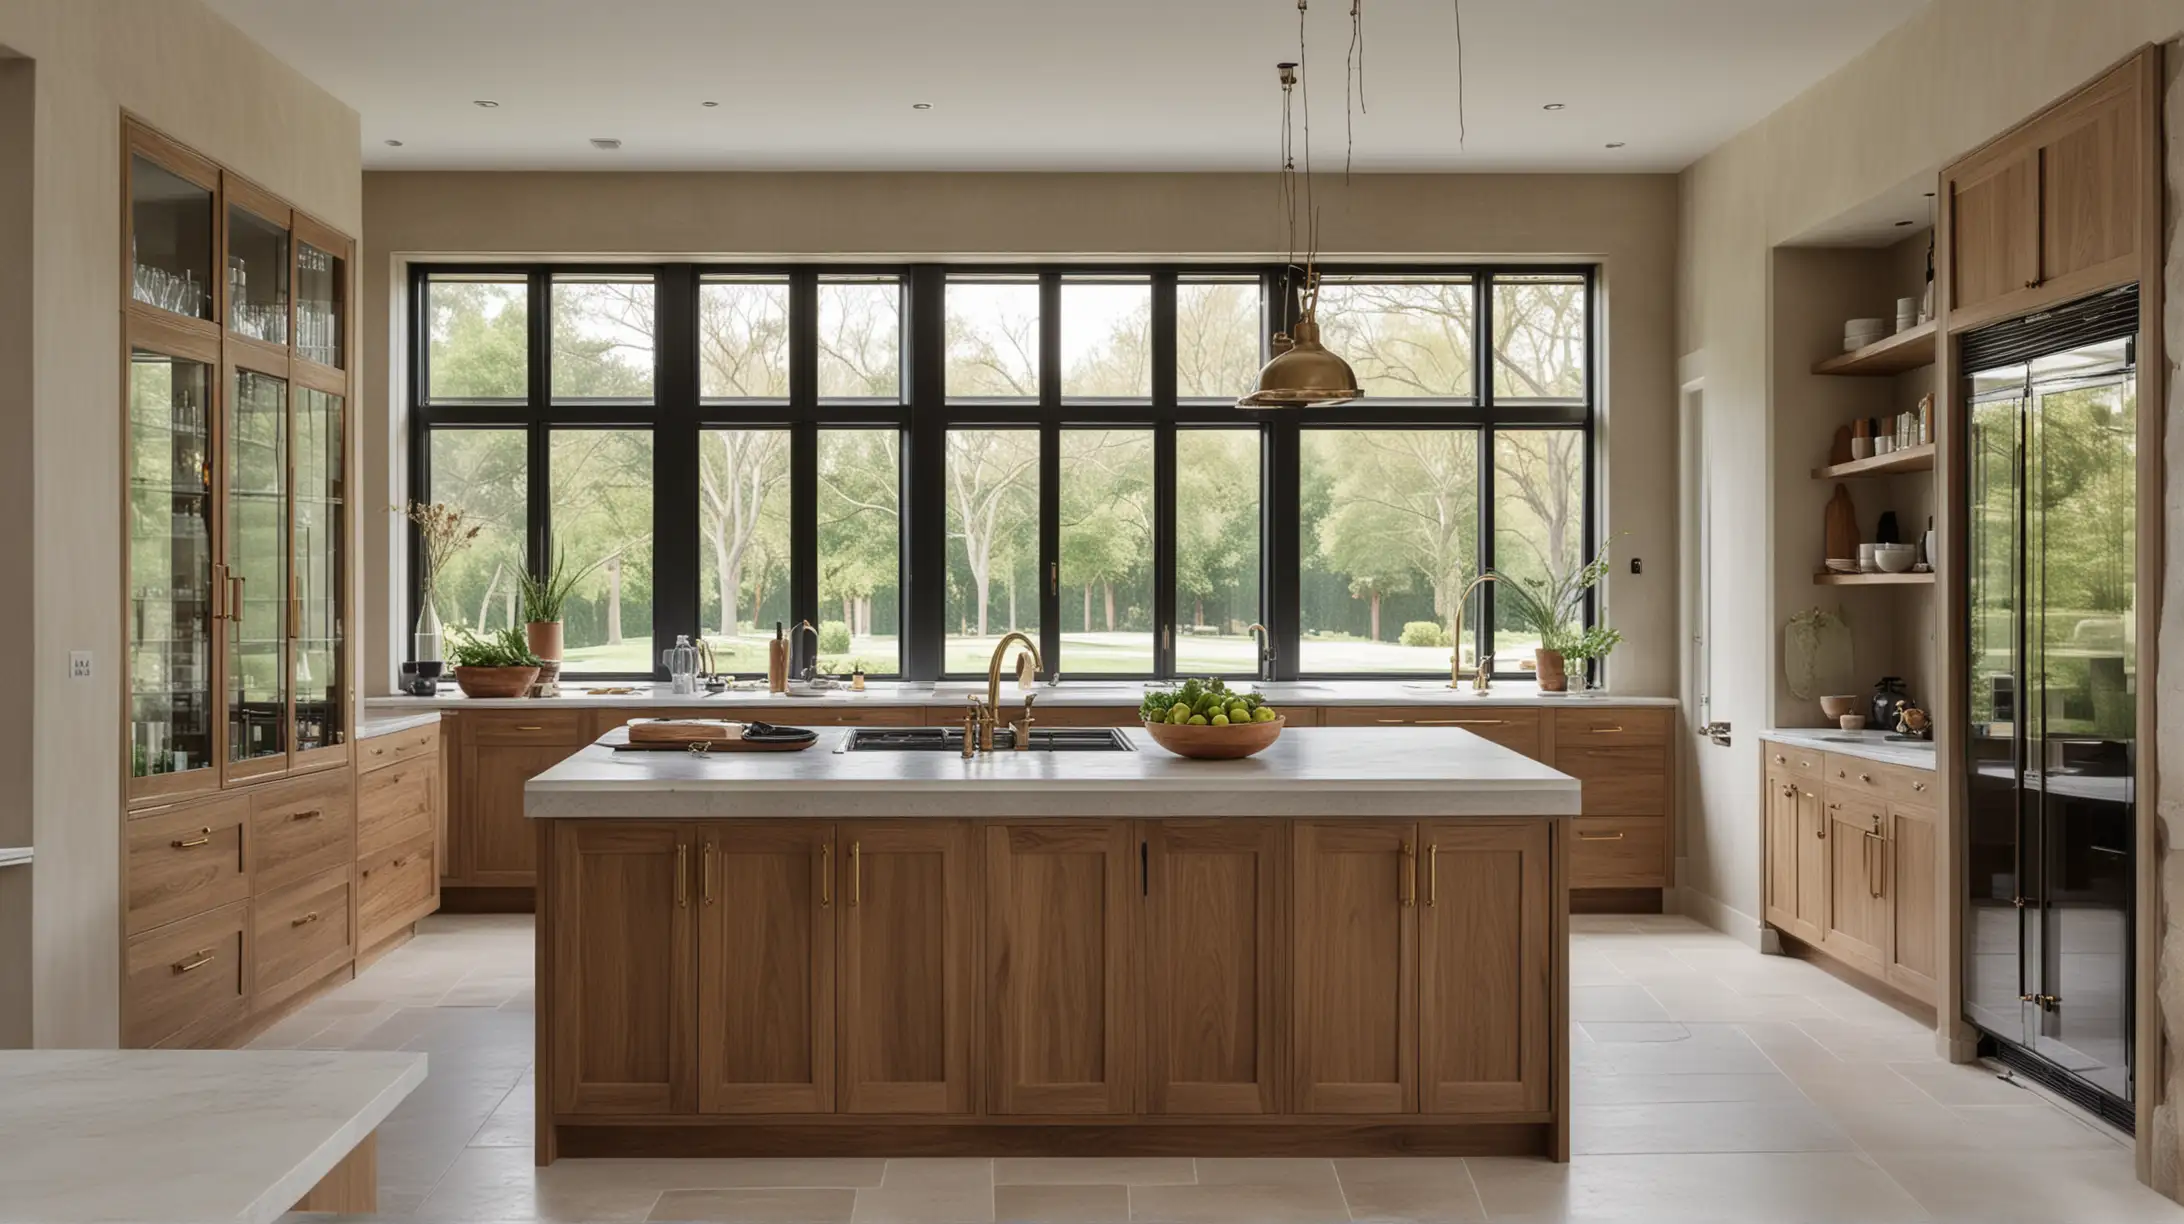 a large minimalist organic moody European farmhouse inspired home kitchen with central island; limestone floor, walnut wood cabinets, limewash painted walls, brass handles; large window overlooking the garden; glass fluted panel doors to the butlers pantry

